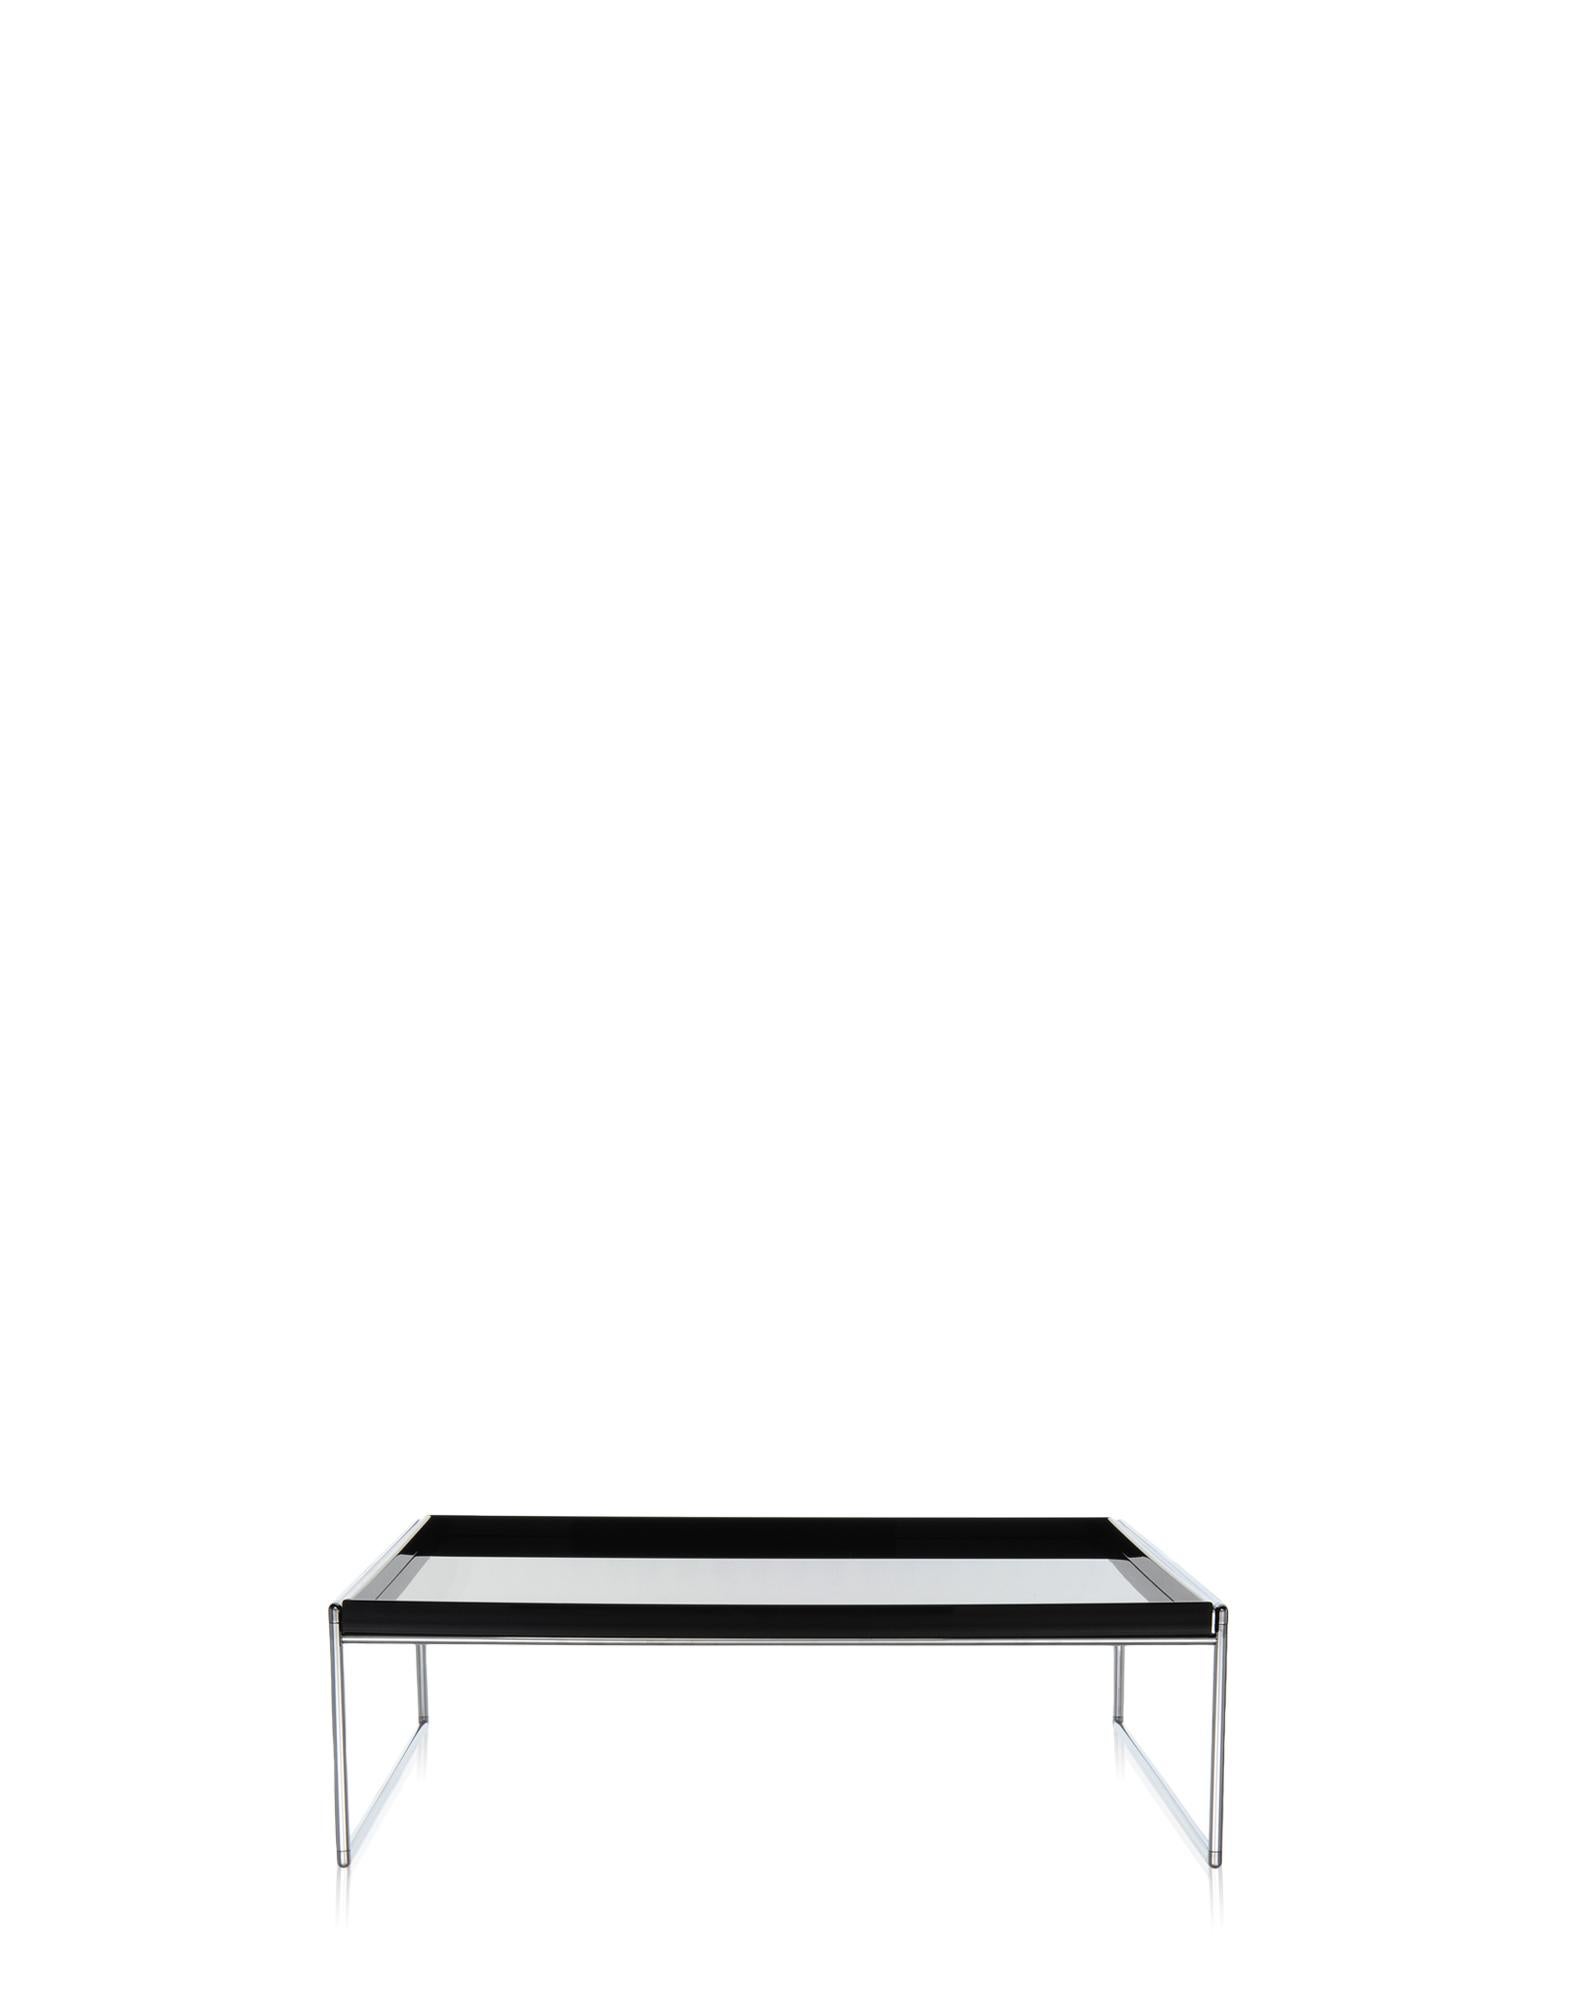 This is an articulated system of table surfaces for the home or office. The construction concept of the design is based on small tables and shelf systems, with patterns and finishes which resemble lacquered Japanese trays.

Available in white and